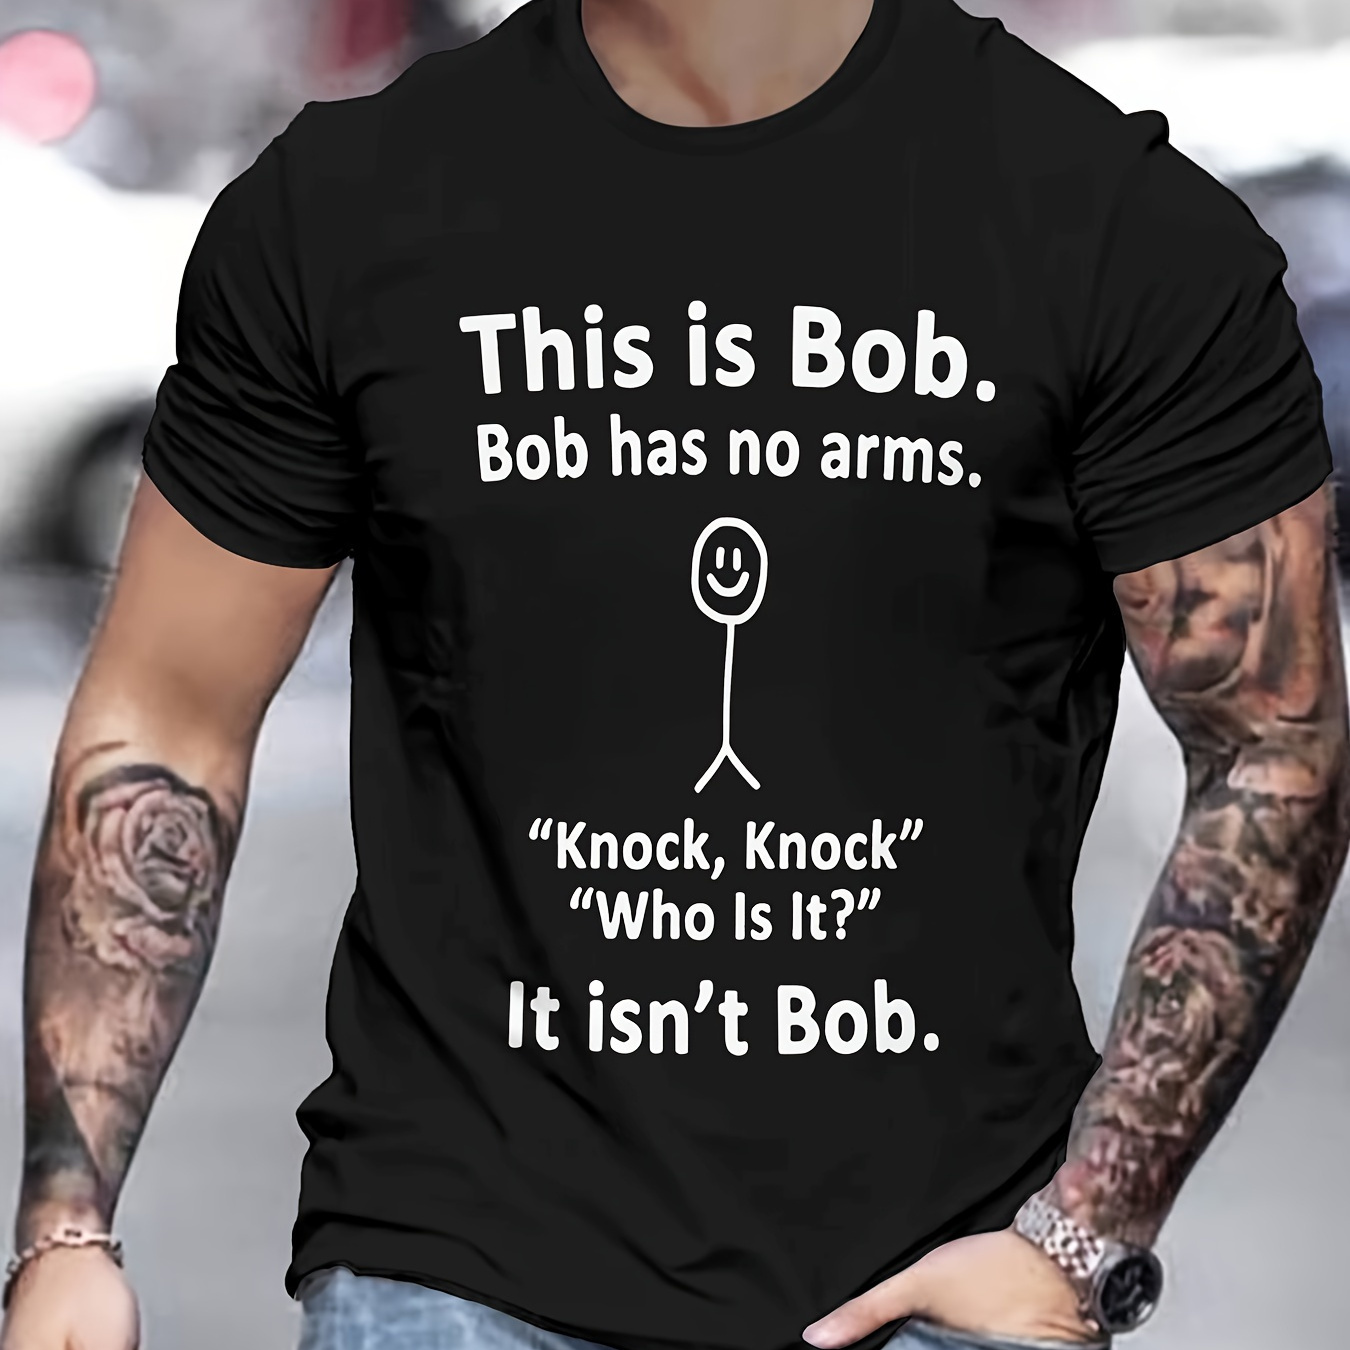 

Men's This Is Bob Graphic Print T-shirt, Vintage Style Short Sleeve Crew Neck Tee, Men's Clothing For Summer Outdoor